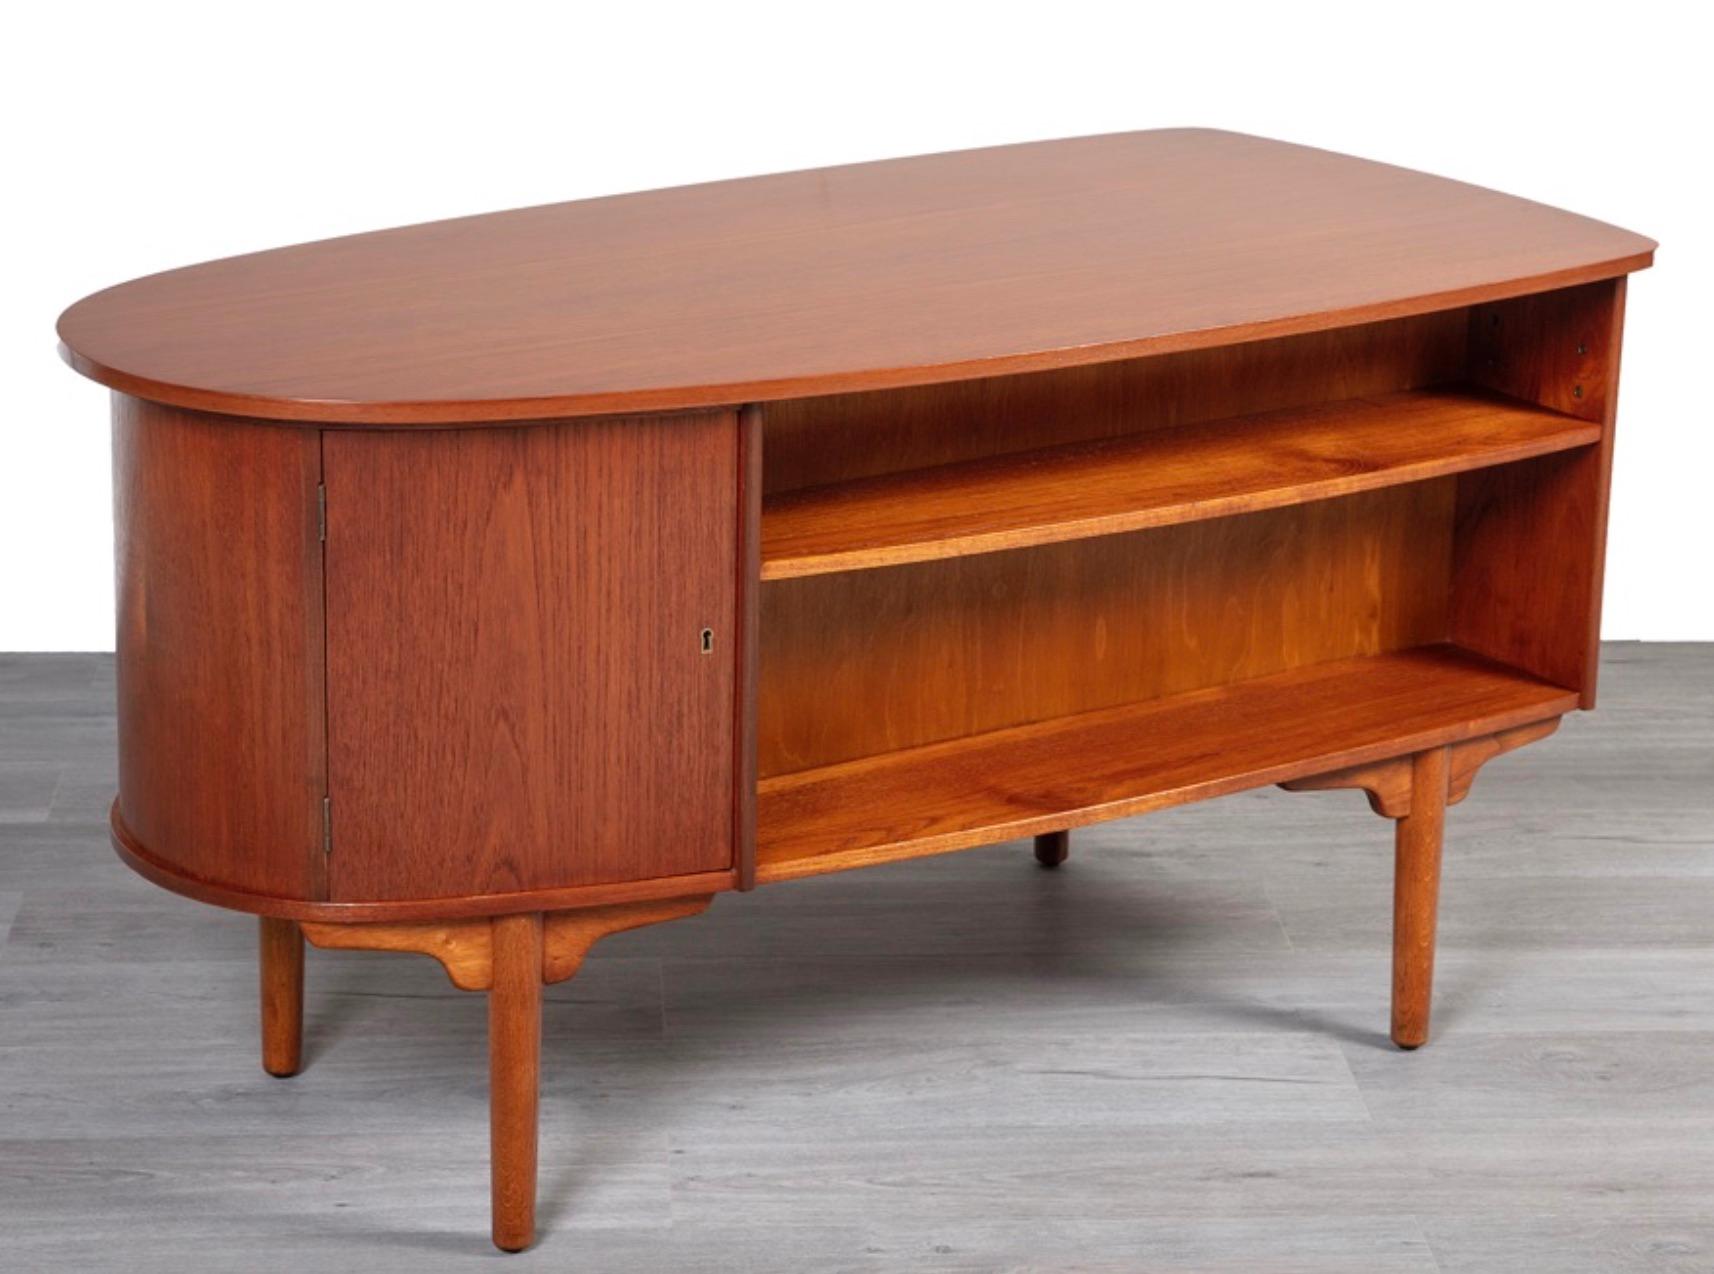 Mid-century Danish teak desk by H.P. Hansen for Randers designed in the shape of a ball and comprised of four solid wood dovetail drawers accented by intricately carved handles. The main drawer and storage compartment with unique double-sided